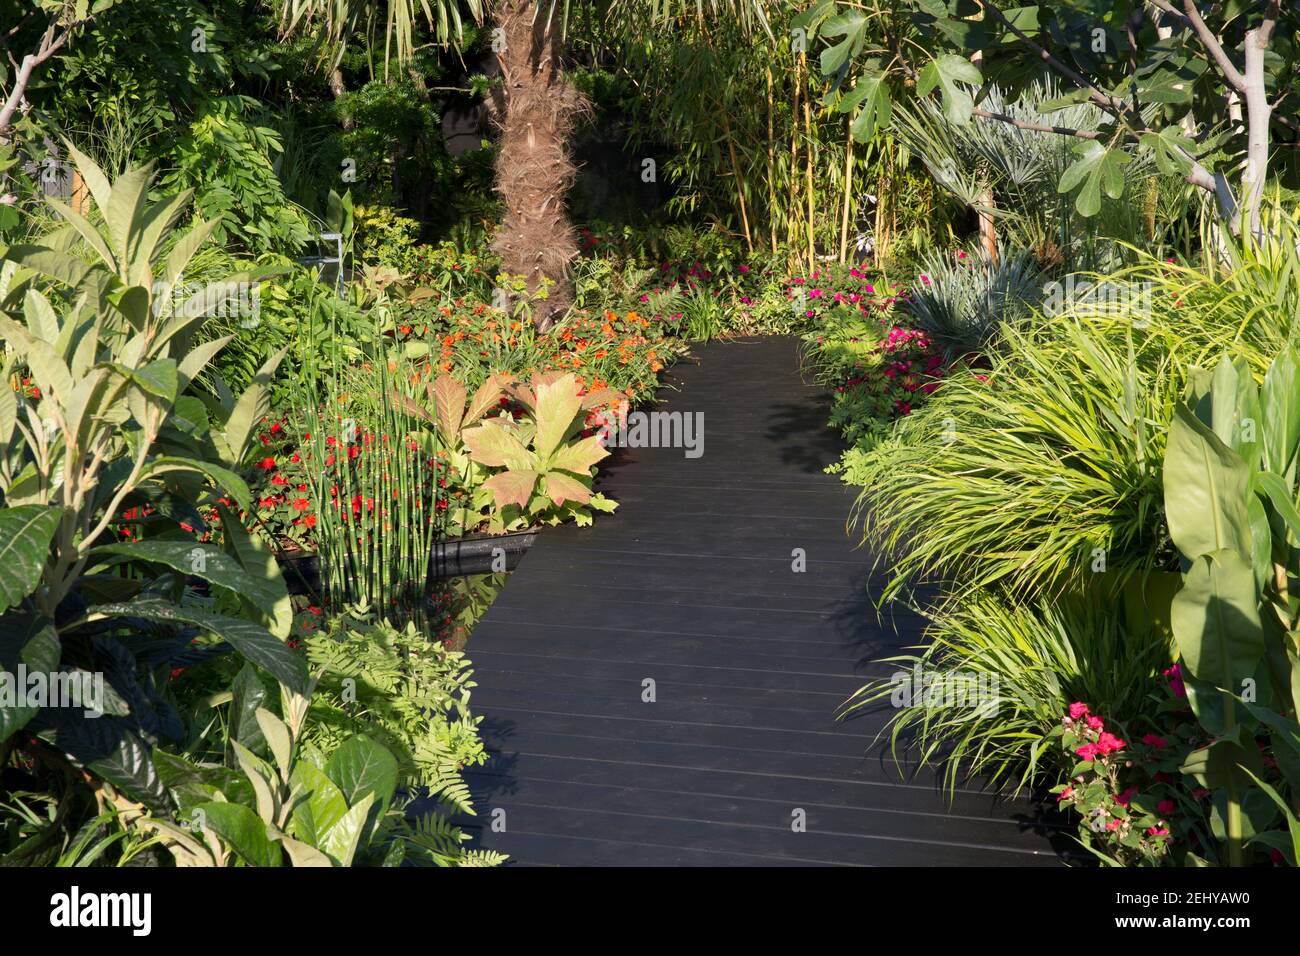 Modern tropical garden design black wooden deck decking with Busy Lizzie Imara in borders and tropical style planting with ferns Stock Photo